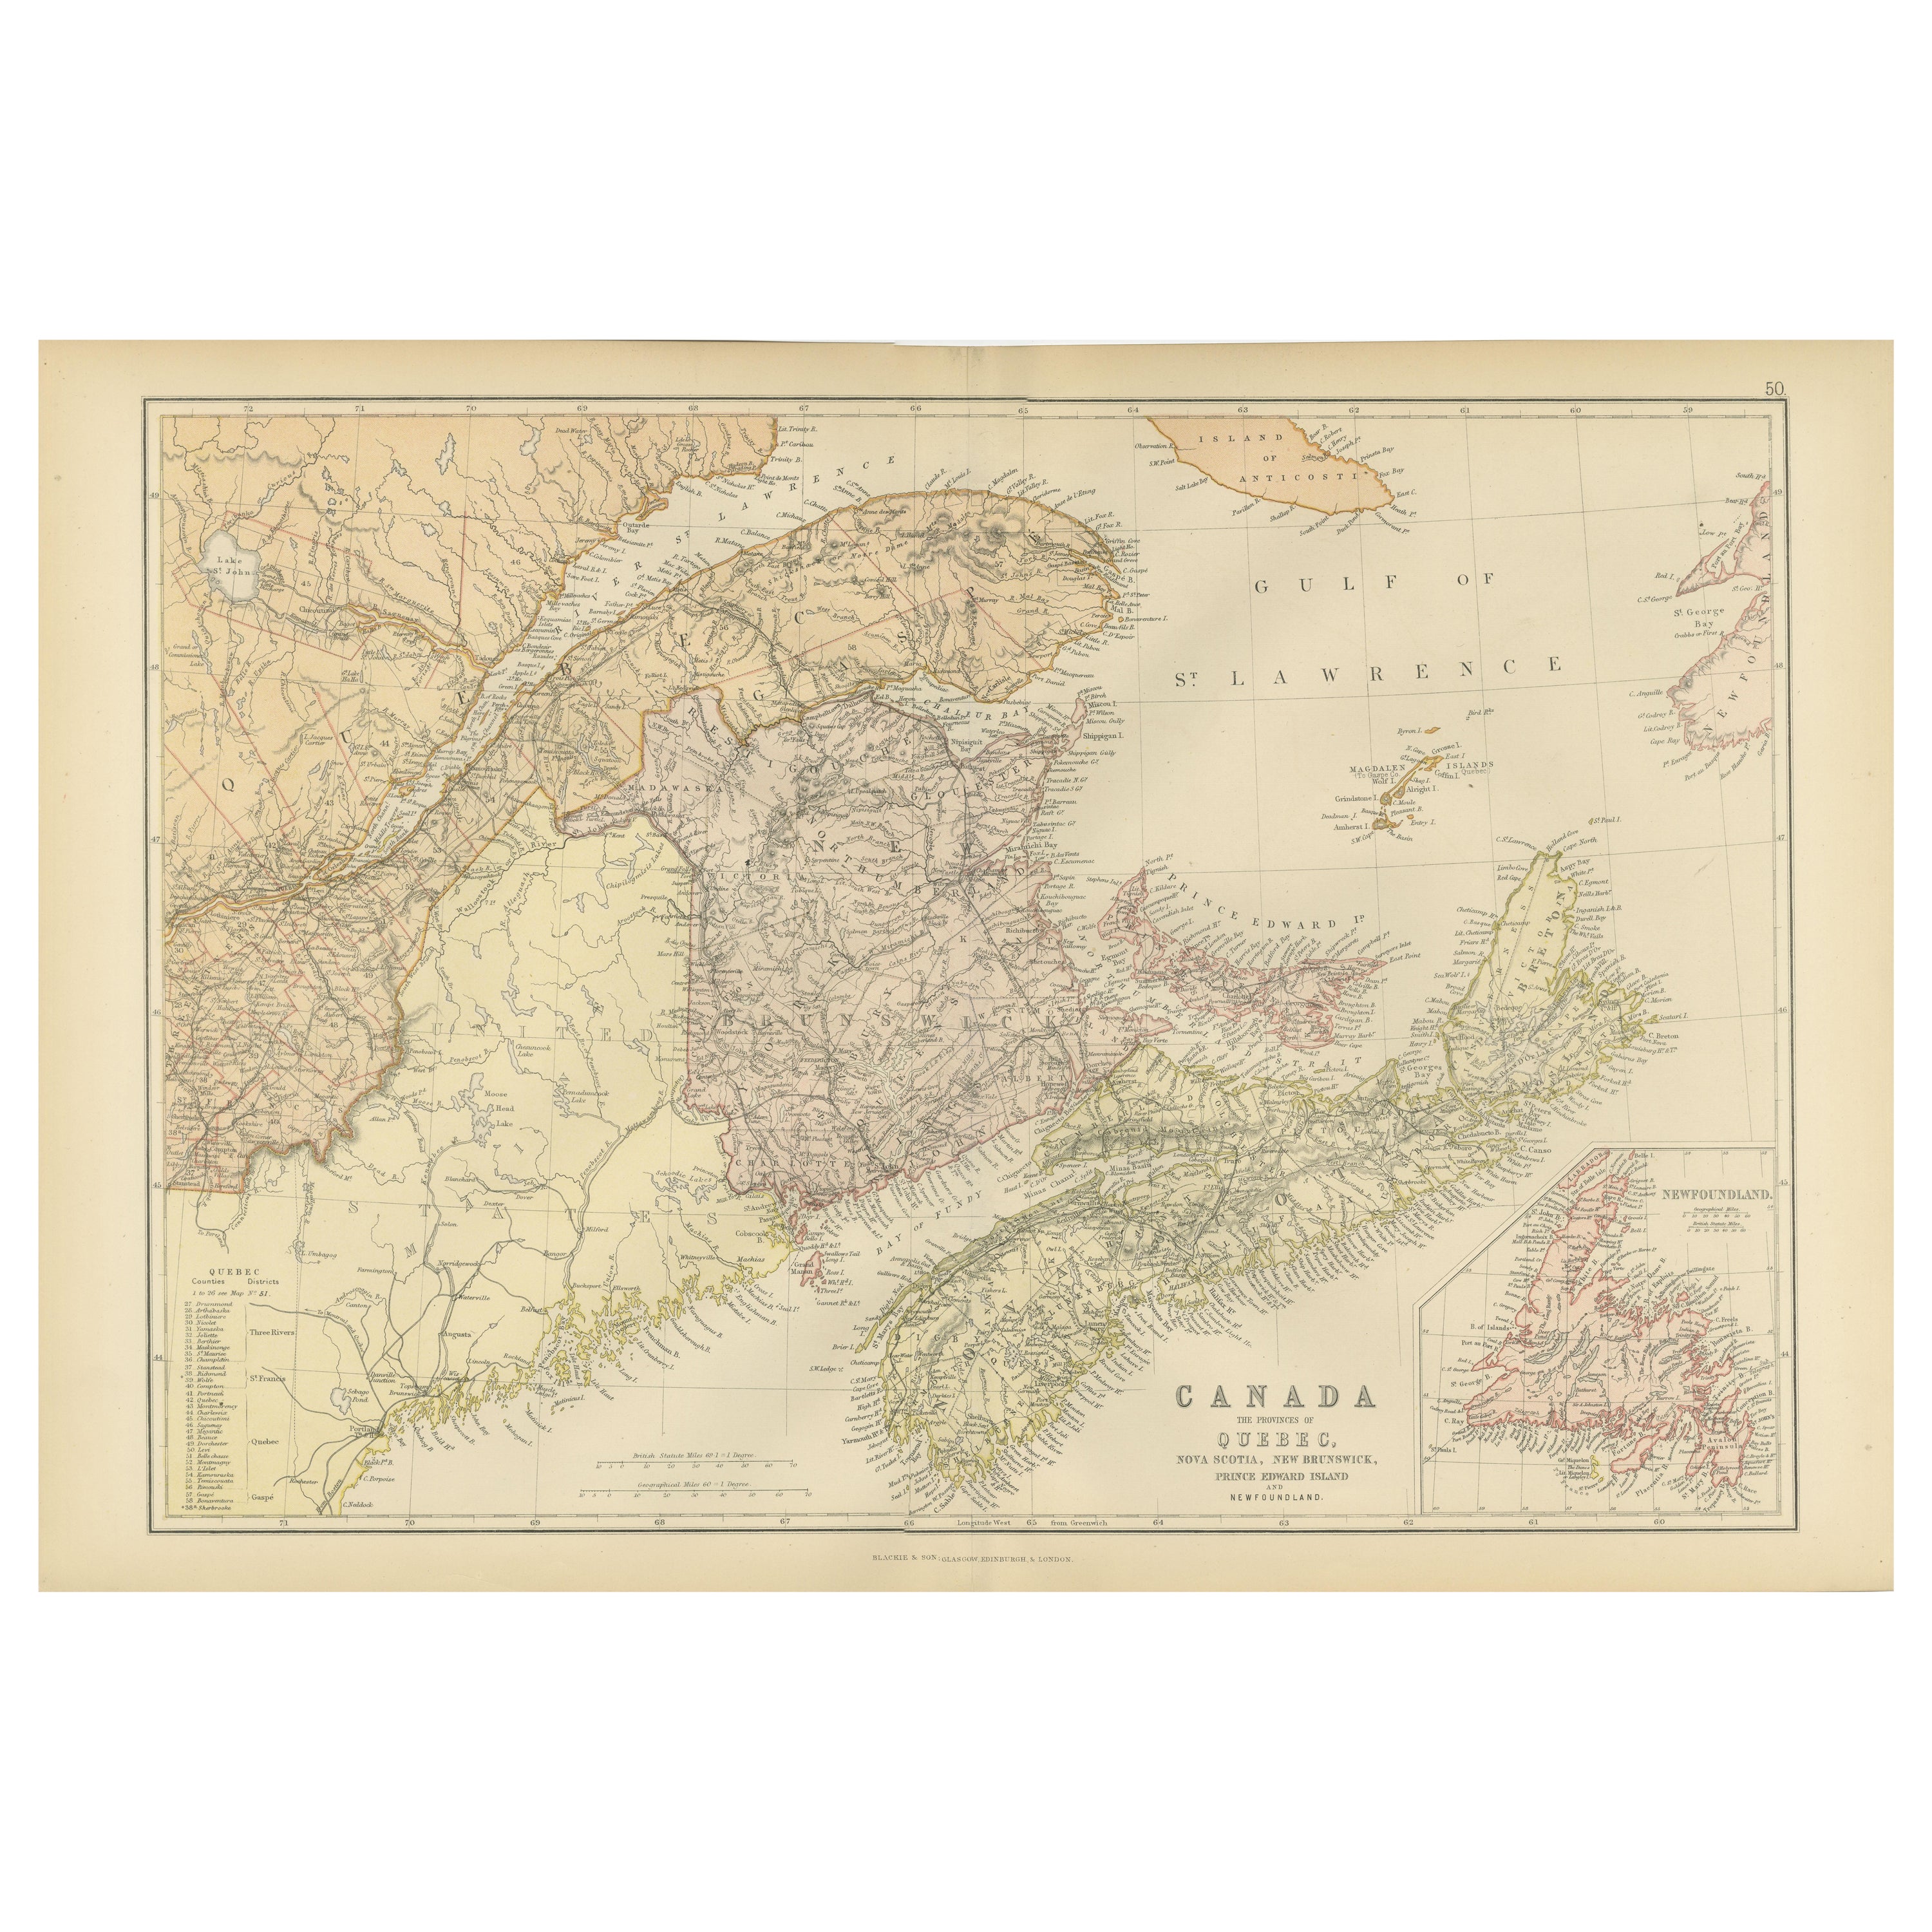 Decorative Antique Map of Eastern Canada, Published in 1882